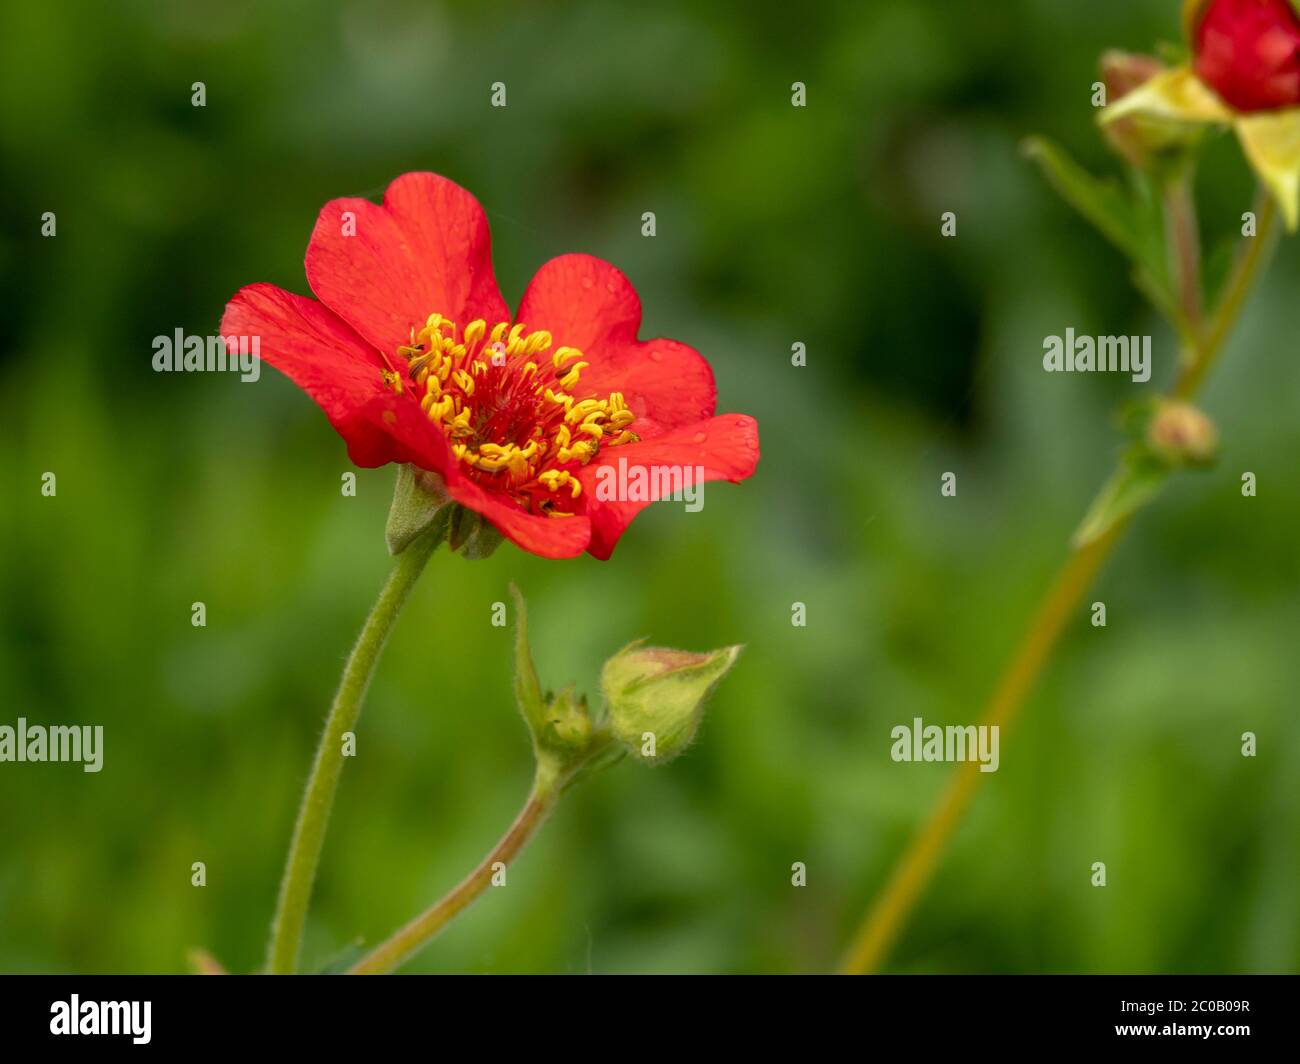 Closeup of a pretty orange flower and bud of Geum chiloense Feuerball in a garden Stock Photo